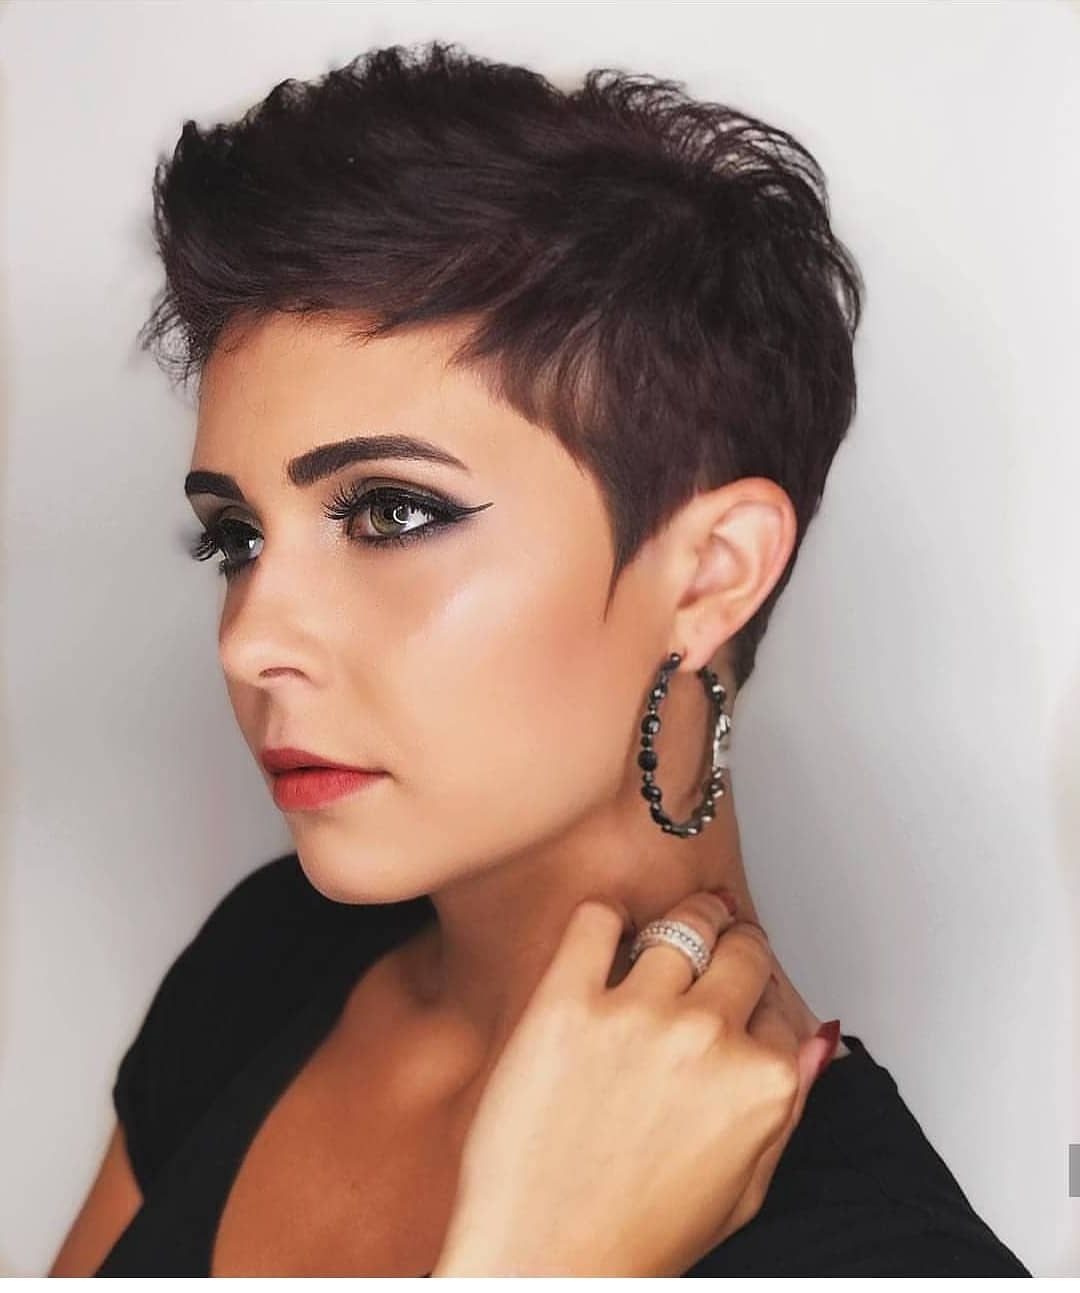 10 Easy Pixie Haircut Innovations – Everyday Hairstyle For Short Hair 2021 Within Well Known Undercut Pixie Hairstyles For Thin Hair (View 7 of 20)